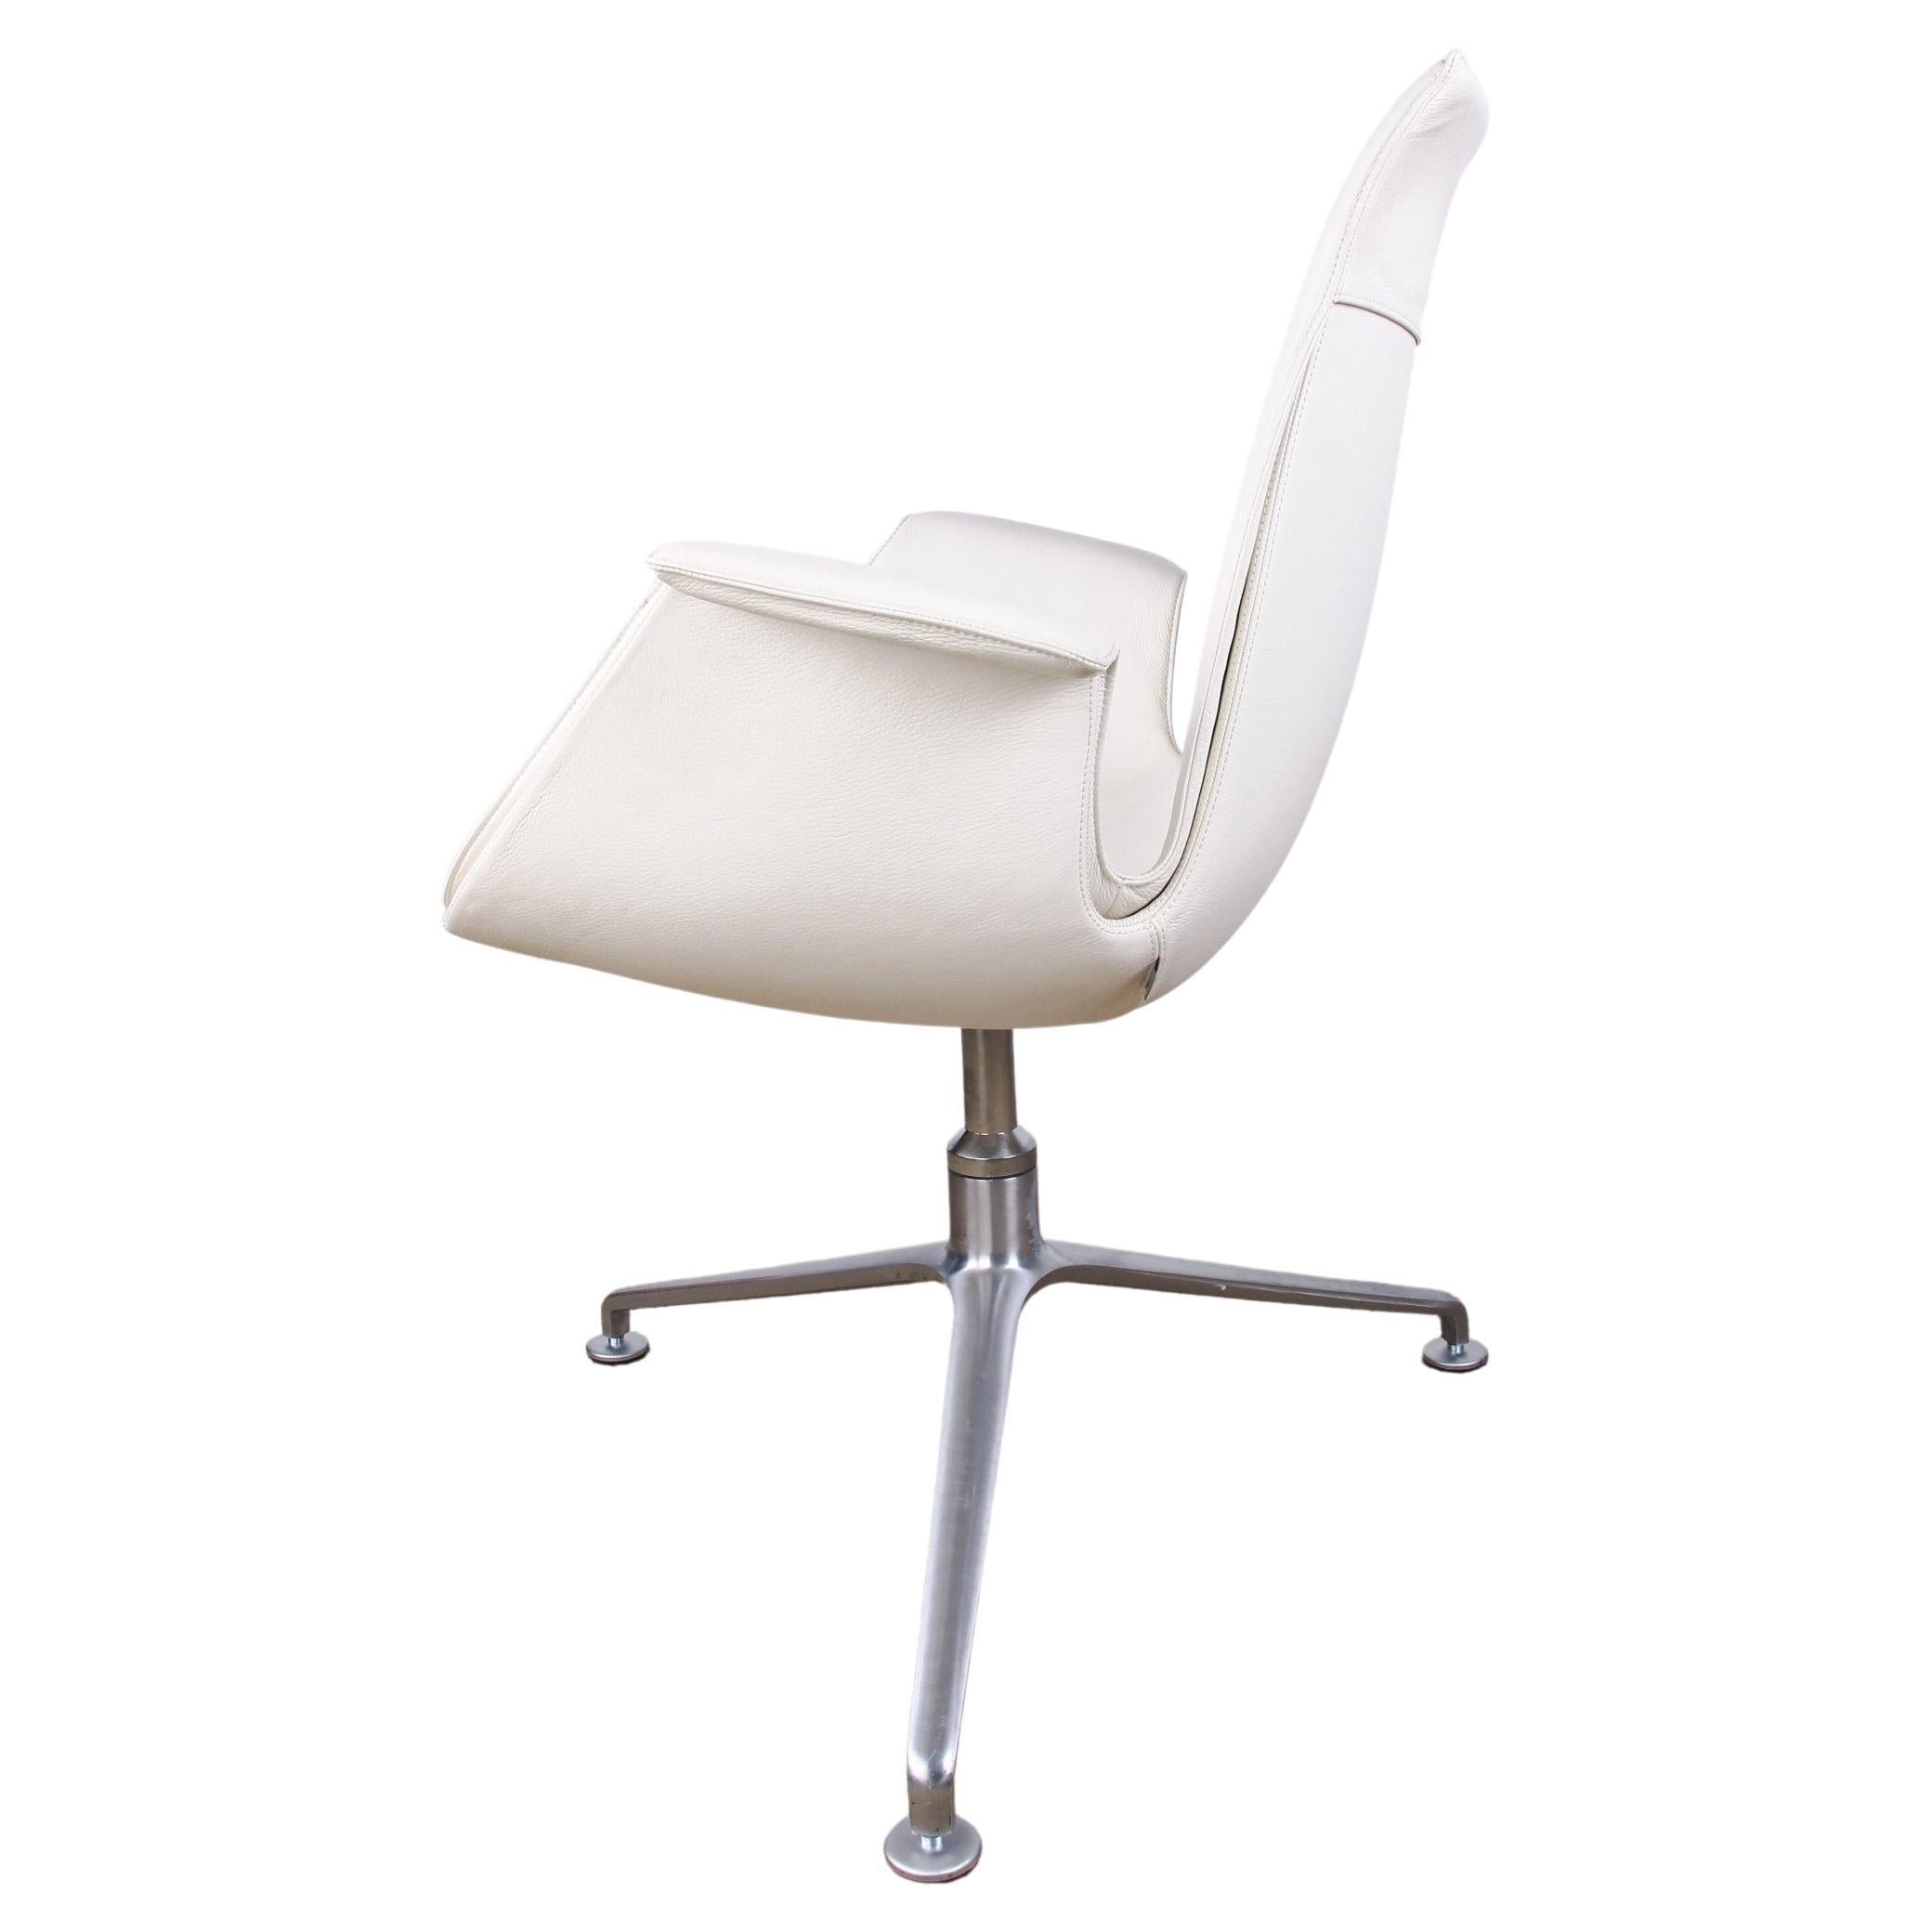 Danish Armchair in White Leather and Steel, Model Fk 6725 by Preben Fabricius For Sale